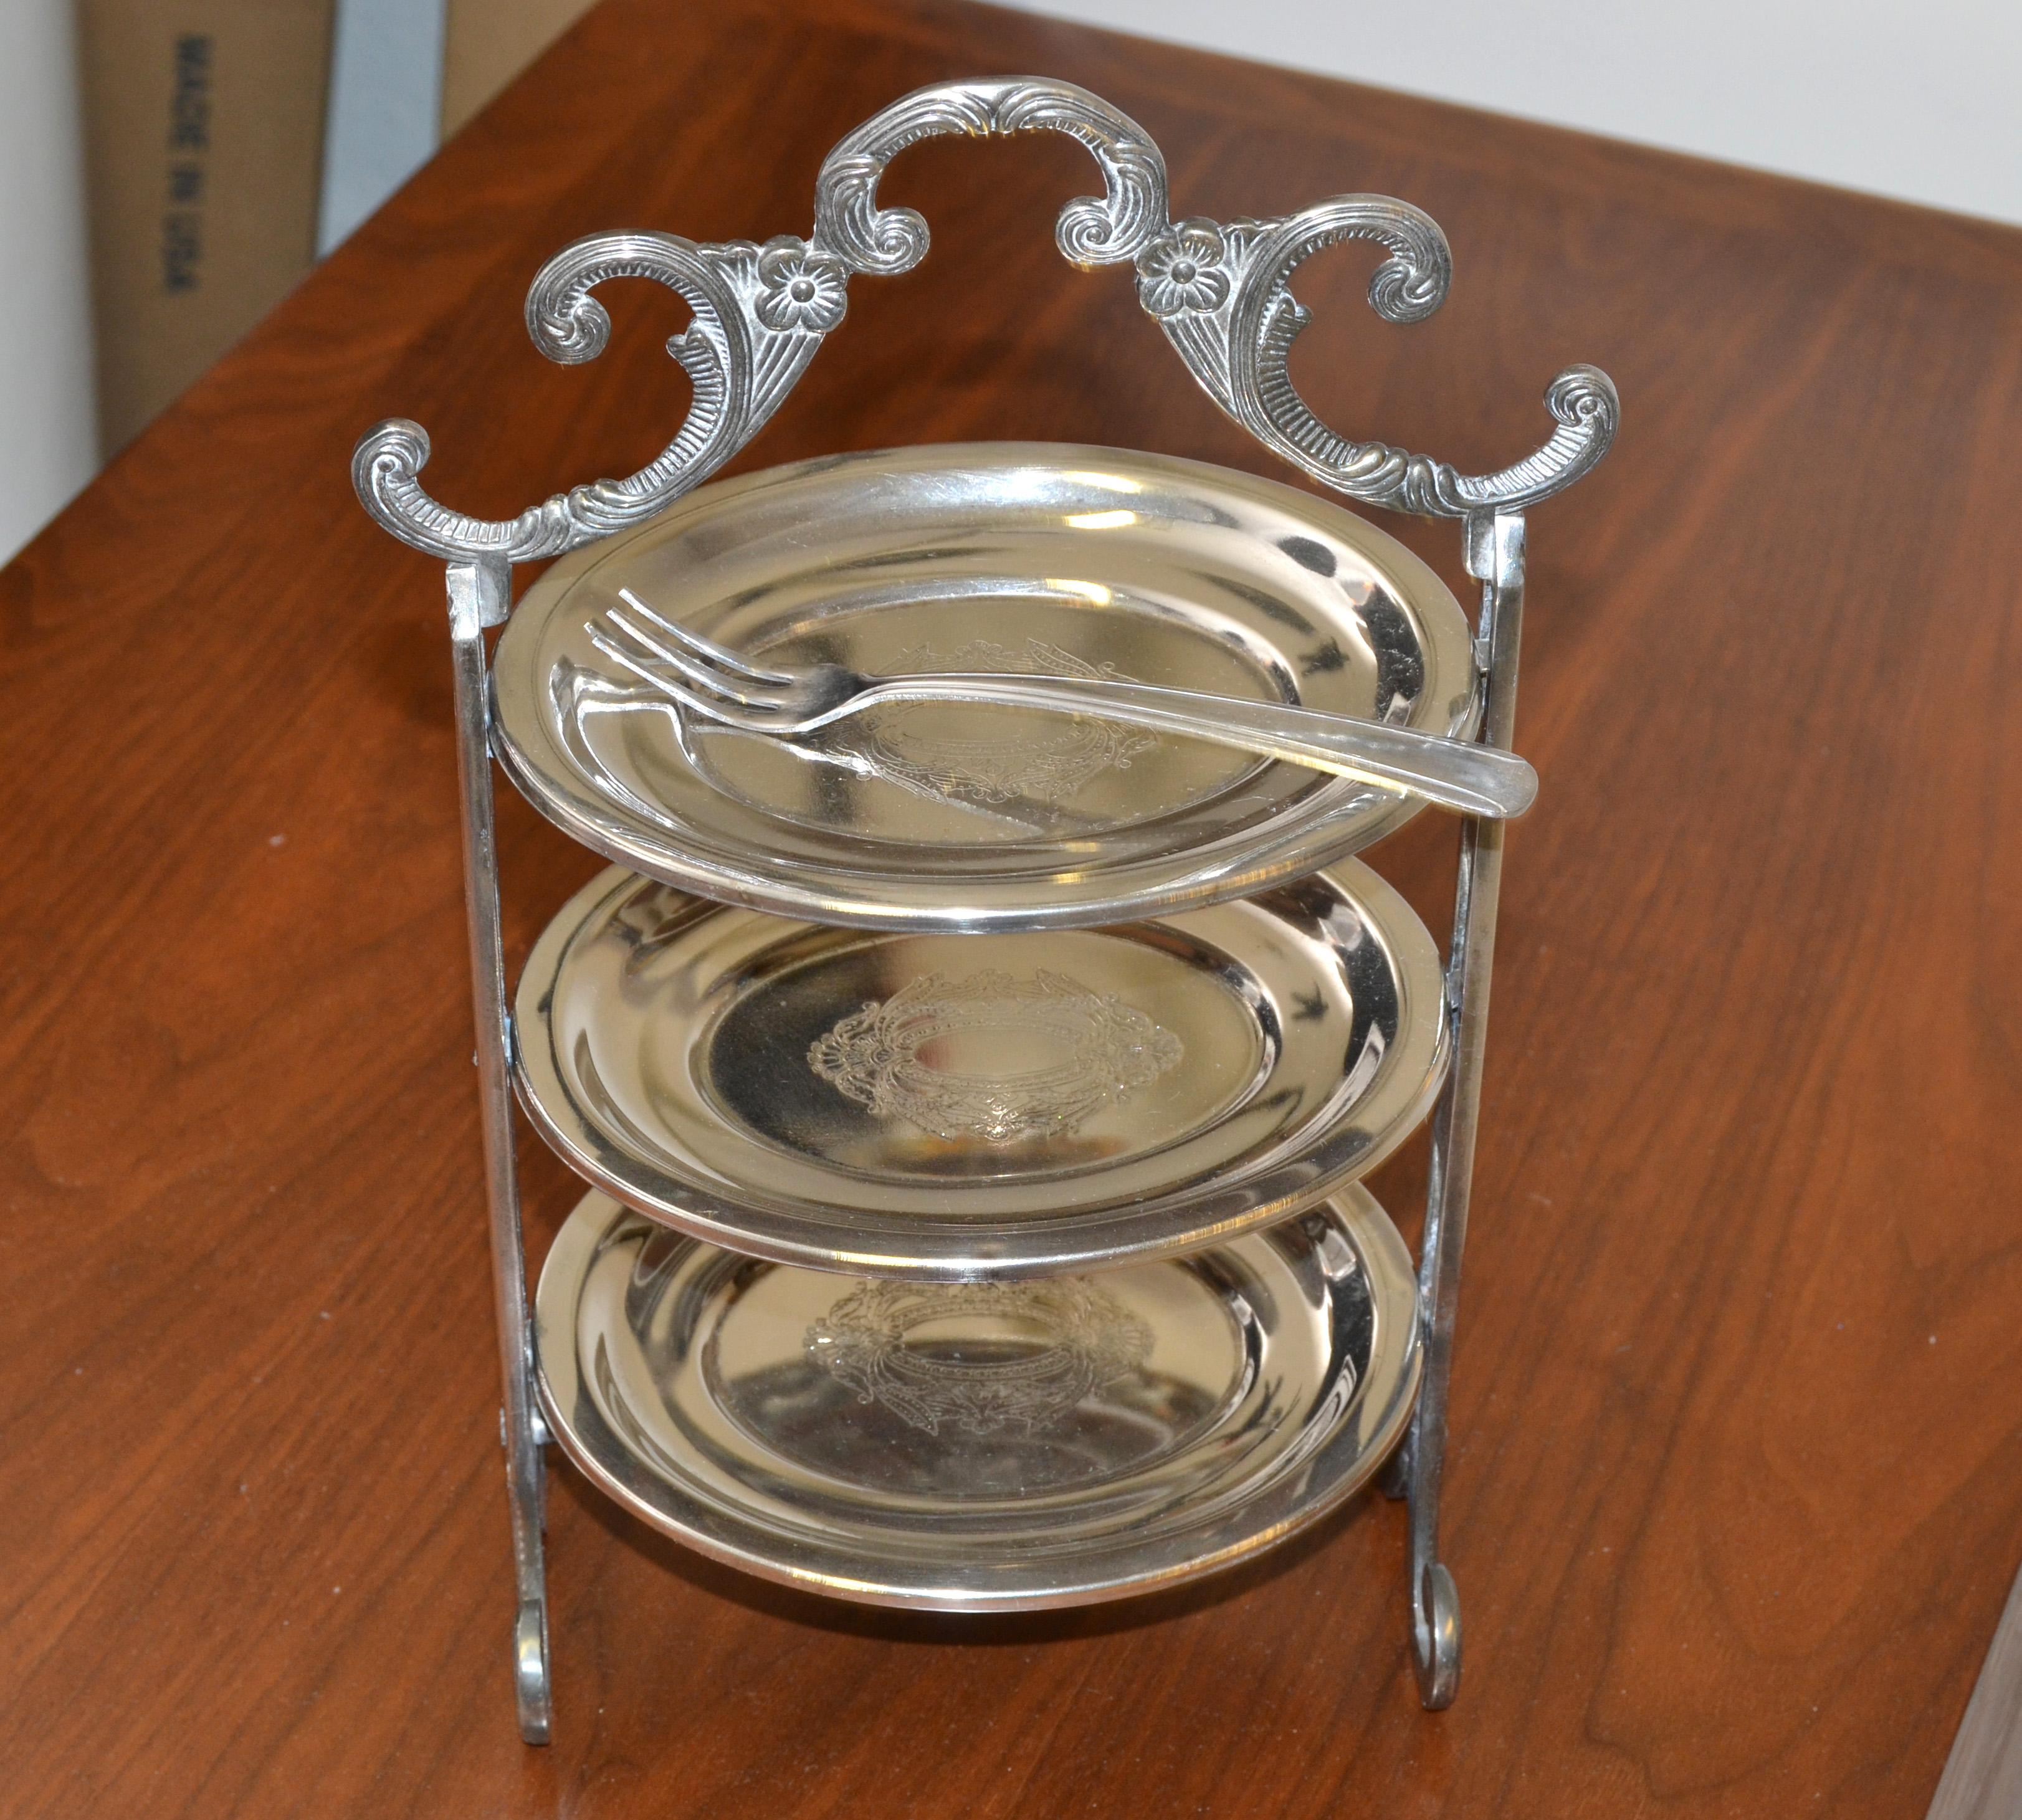 Edwardian Sheffield Silver Company style three-tier silver plated cake stand, patisserie stand or server with silver plated fork.
An item redolent of another age, this cake stand was originally made for afternoon tea, scones, petit fours, lemon